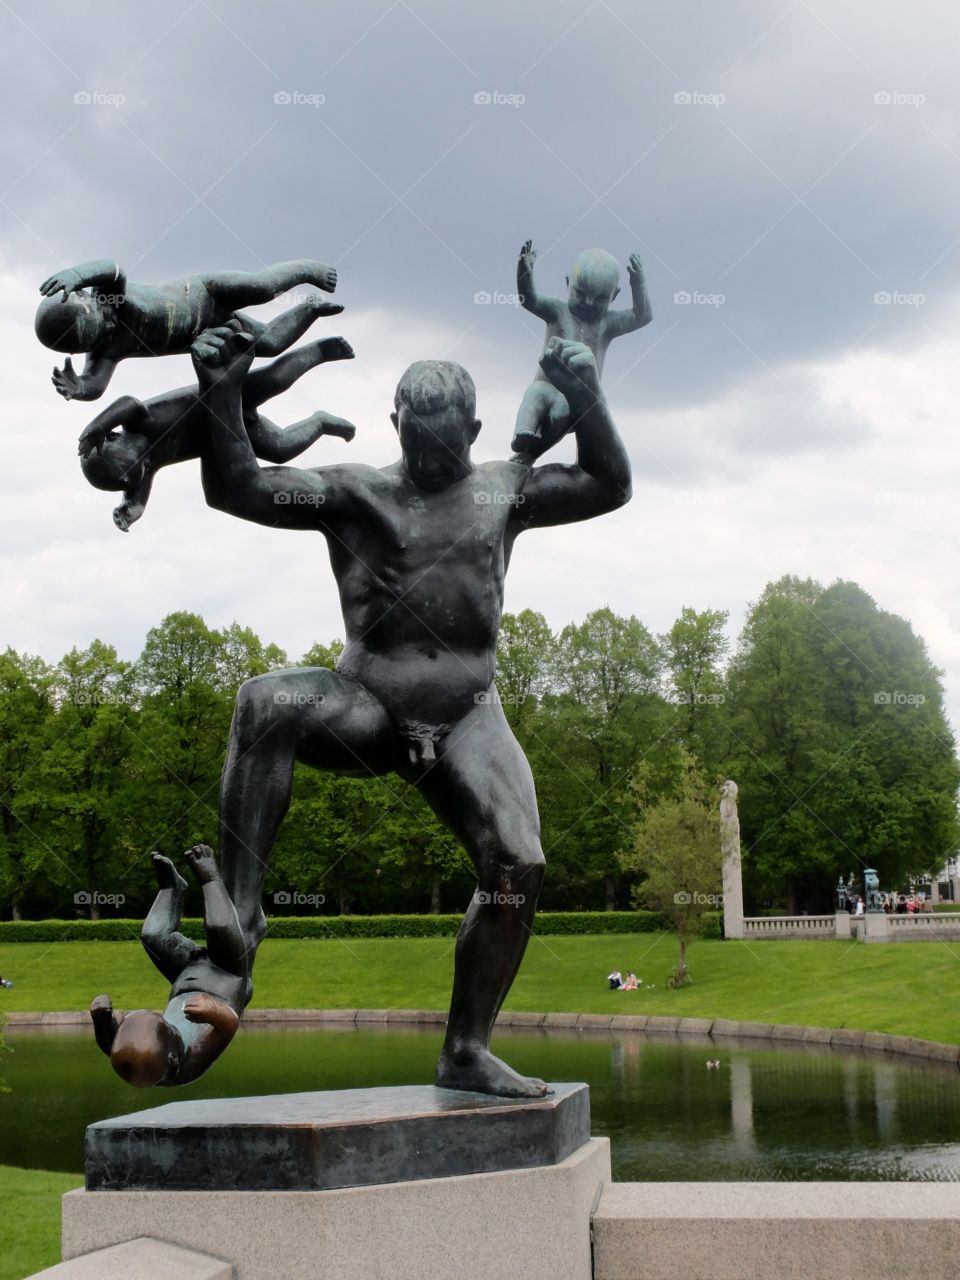 Oslo's Vigeland. A very grotesque statue ayt the Vigeland's park in Oslo.